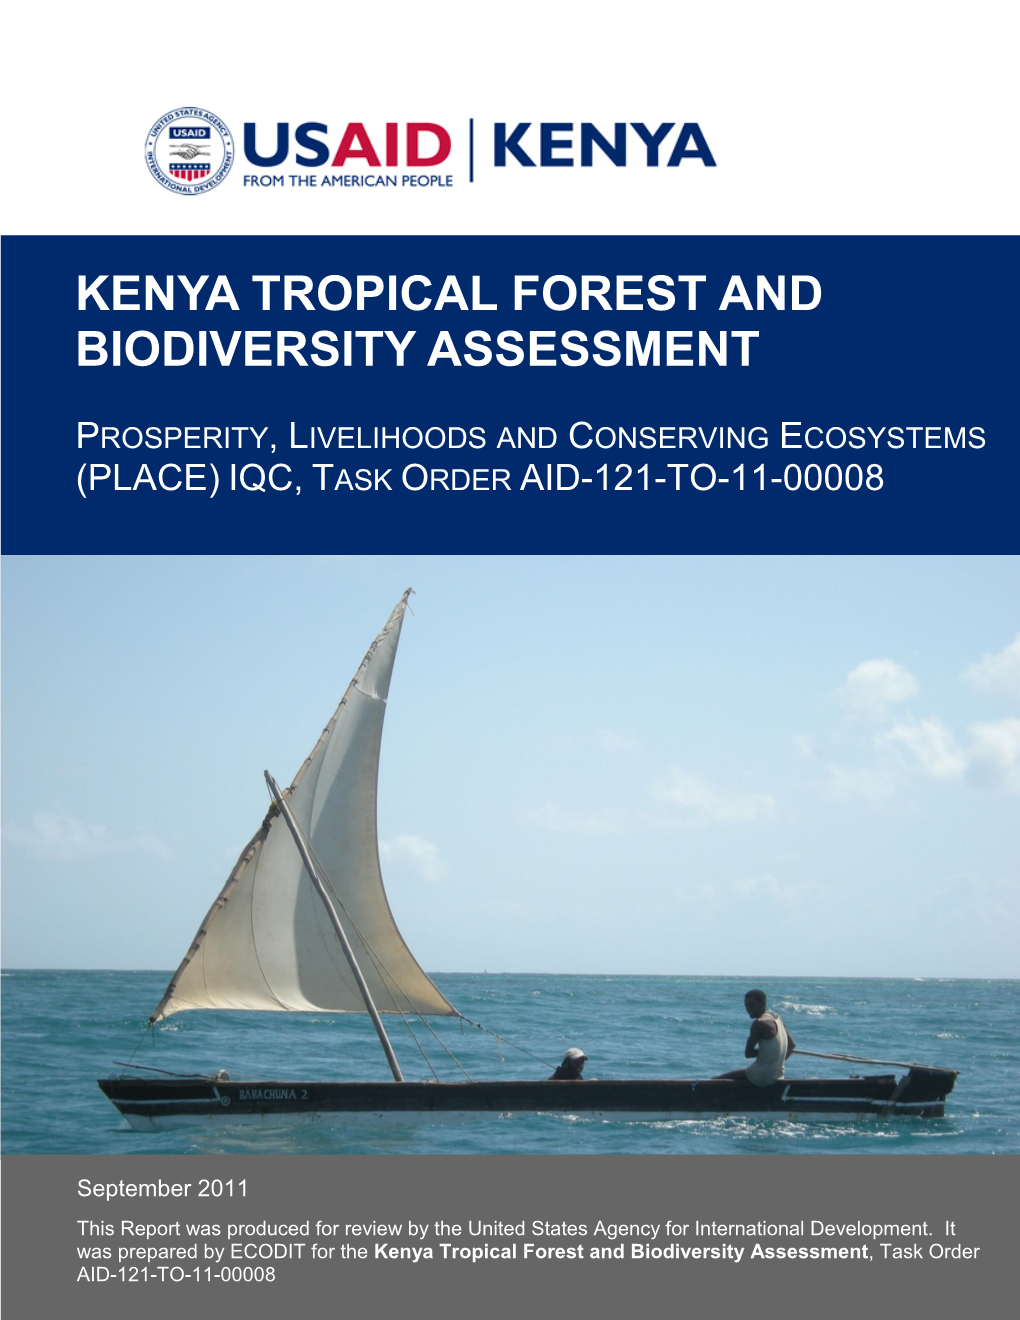 Kenya Tropical Forest and Biodiversity Assessment